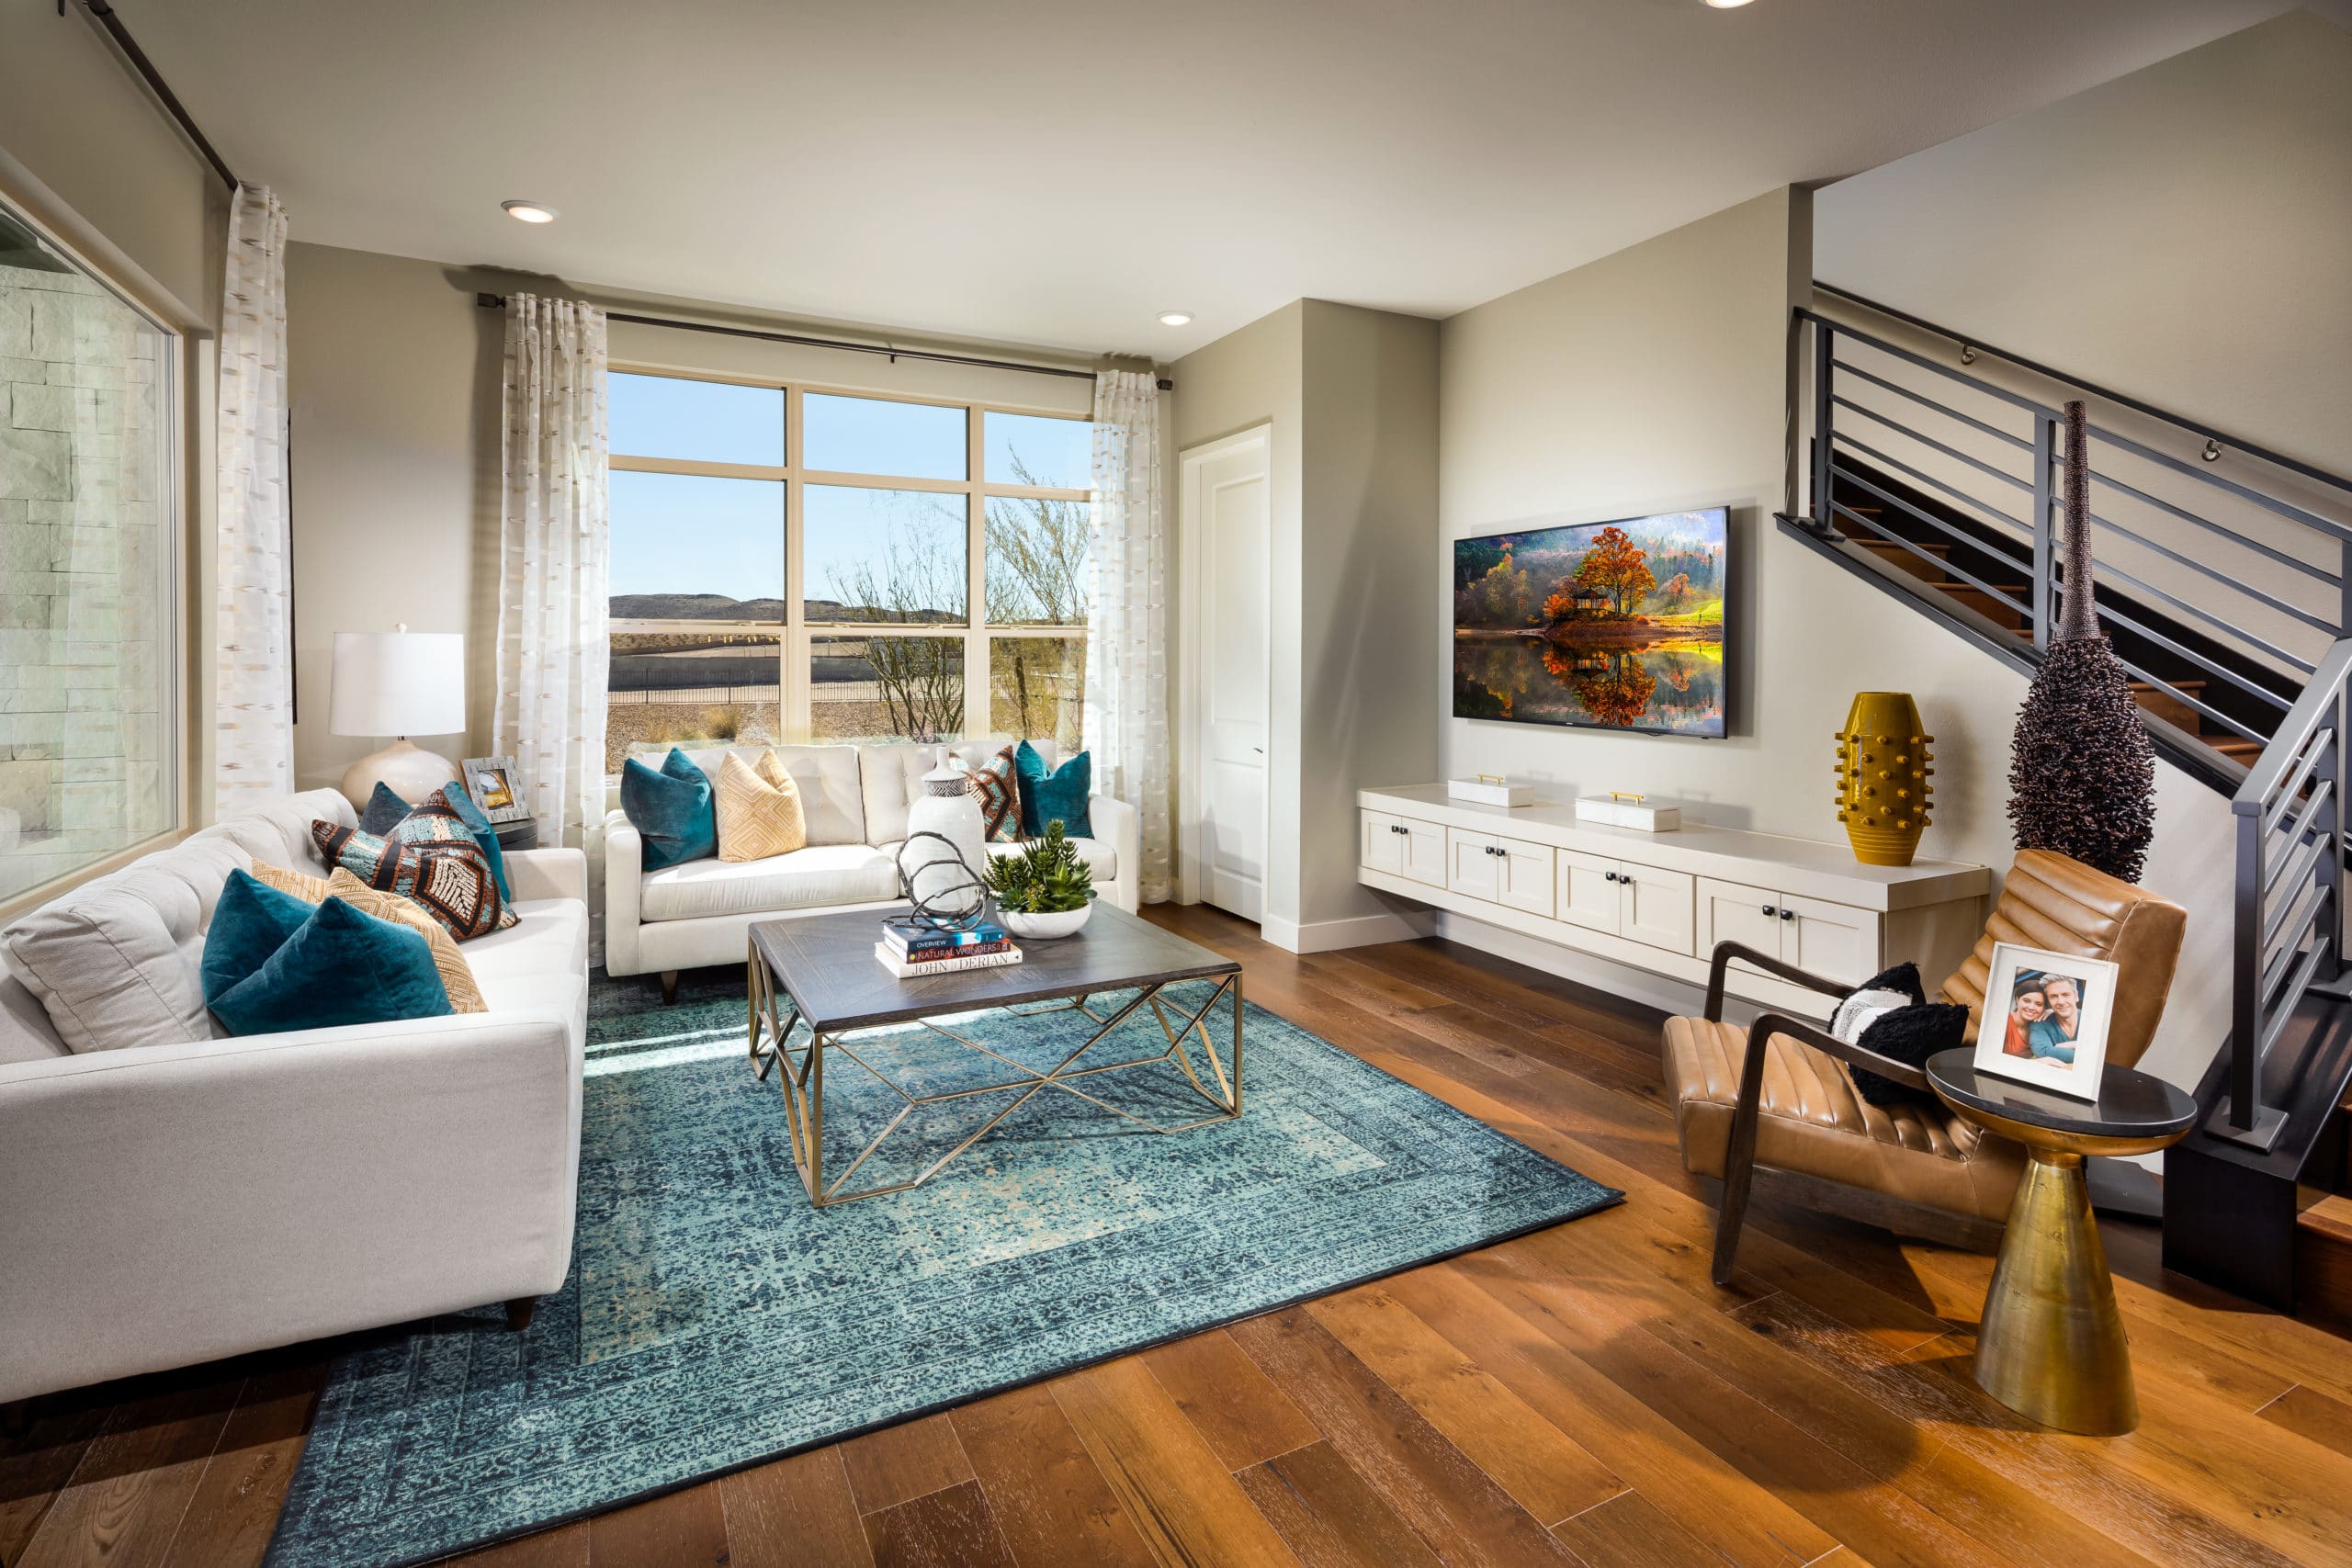 Living Room in Splendor Model in Luxe Collection in Trilogy by Shea Homes in South Square in Summerlin